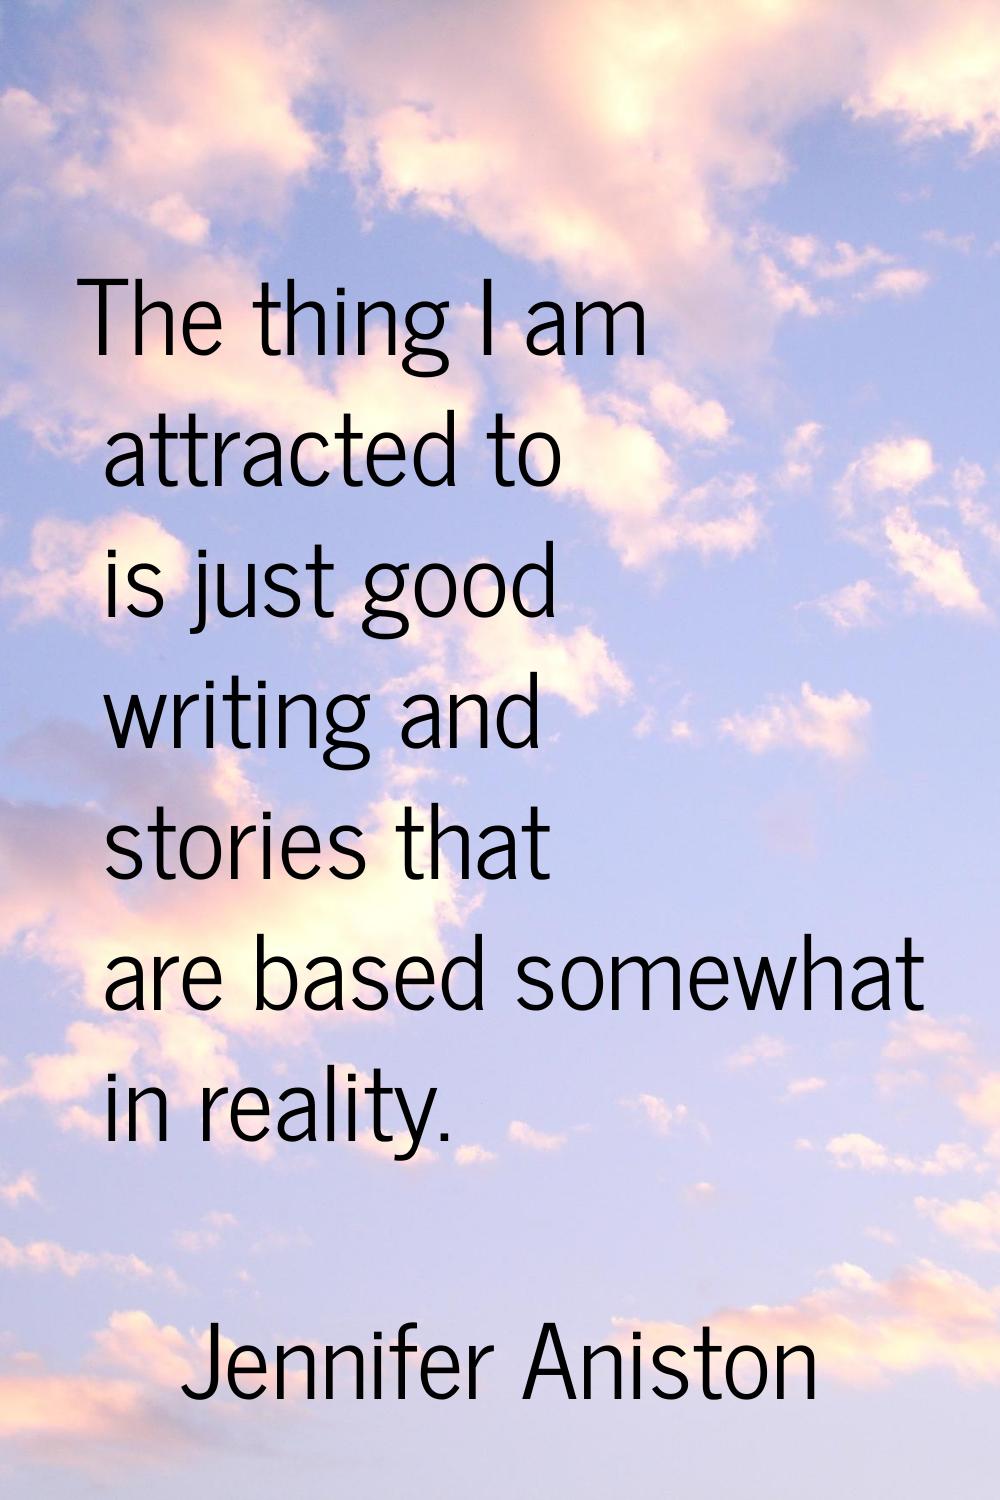 The thing I am attracted to is just good writing and stories that are based somewhat in reality.